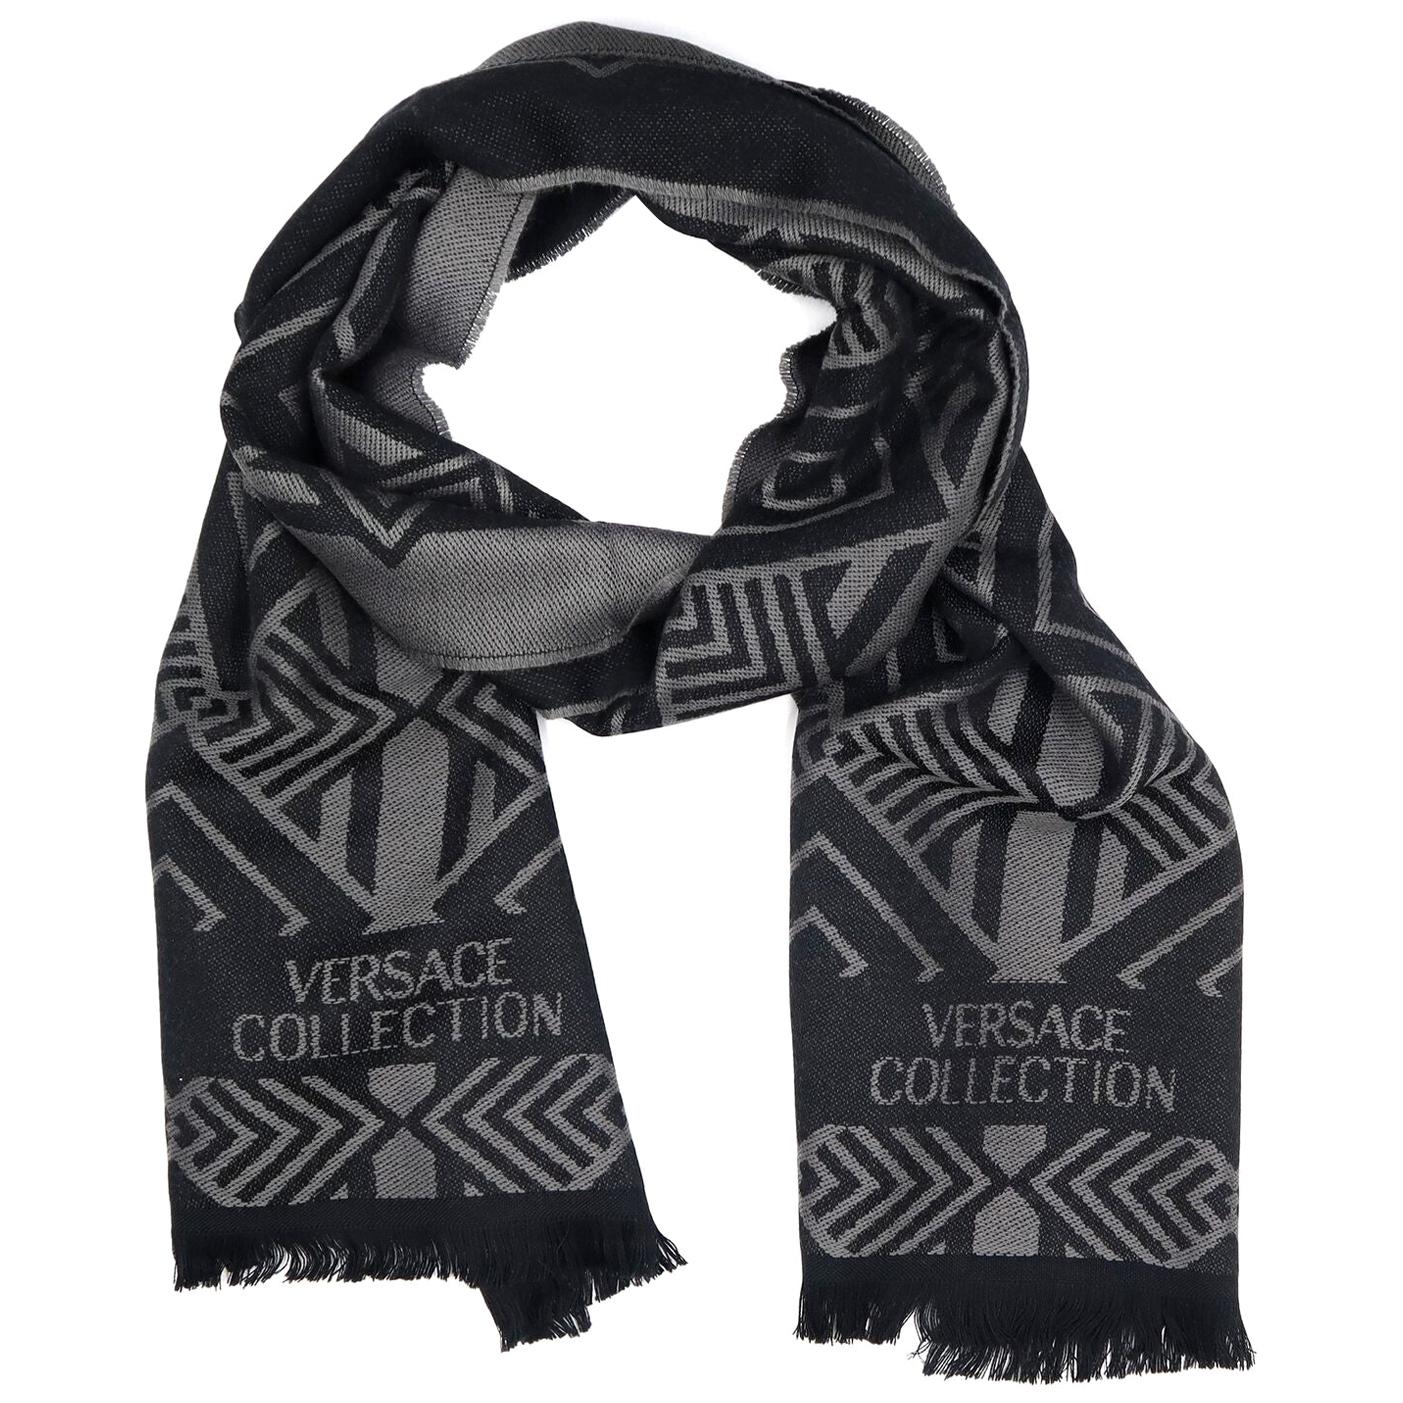 Versace Collection Black & Grey Mens Scarf ISC40R1WIT02856I4019 